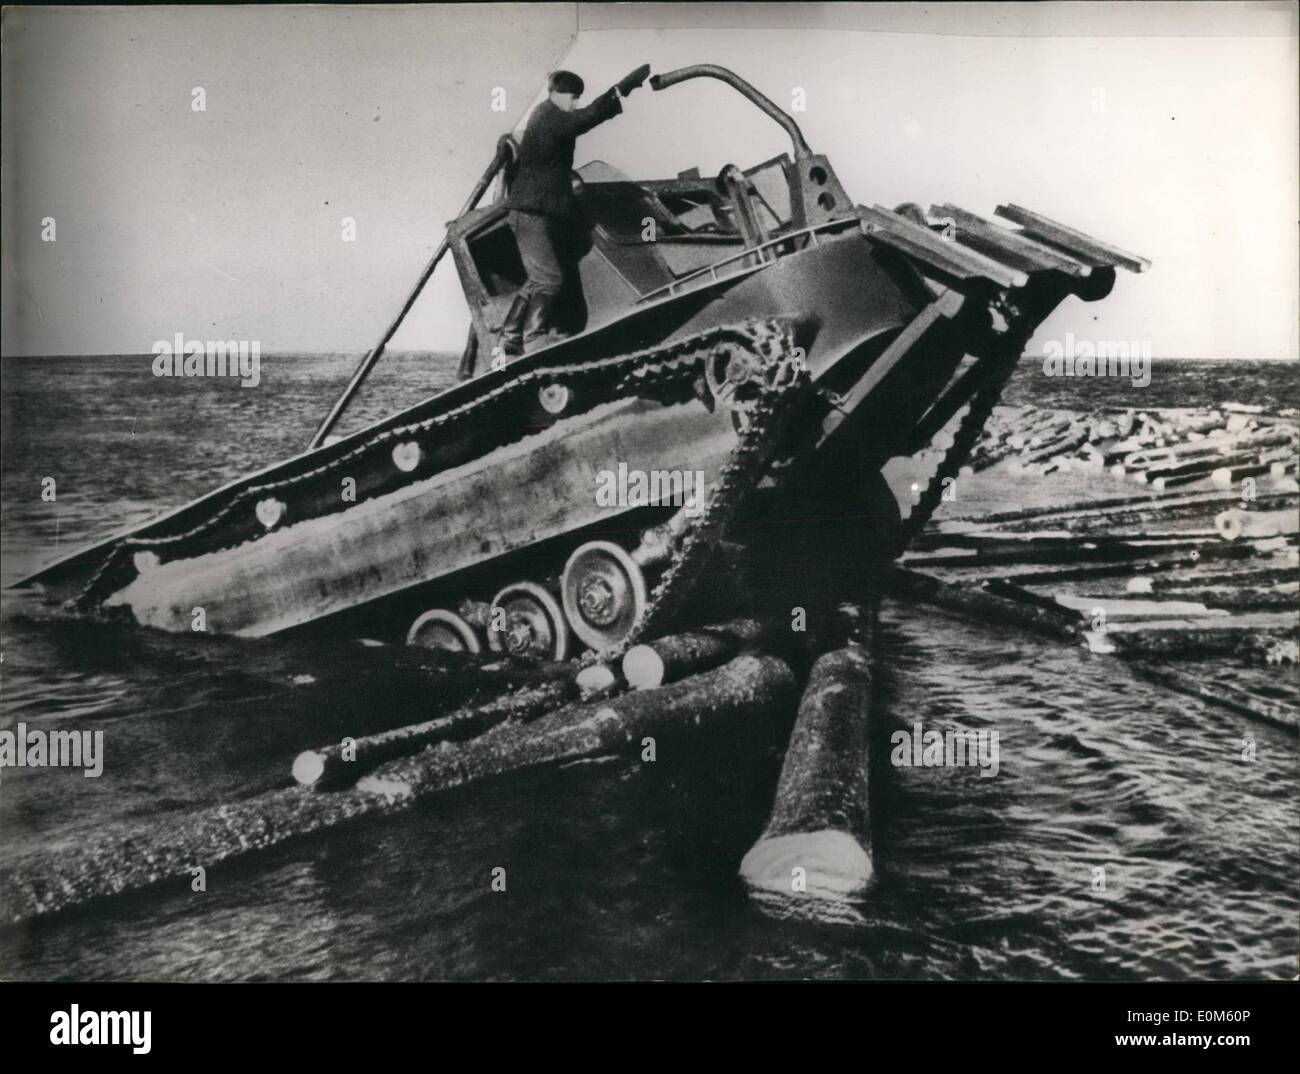 Oct. 10, 1953 - This is a very good implement for timber: Russia where there is plenty of wood developed this tractor lifting jack which works very well on land and also in water. It is able to do any rafting work wanted. With some slight changes the tractor may naturally be used also for purposes of war. Stock Photo